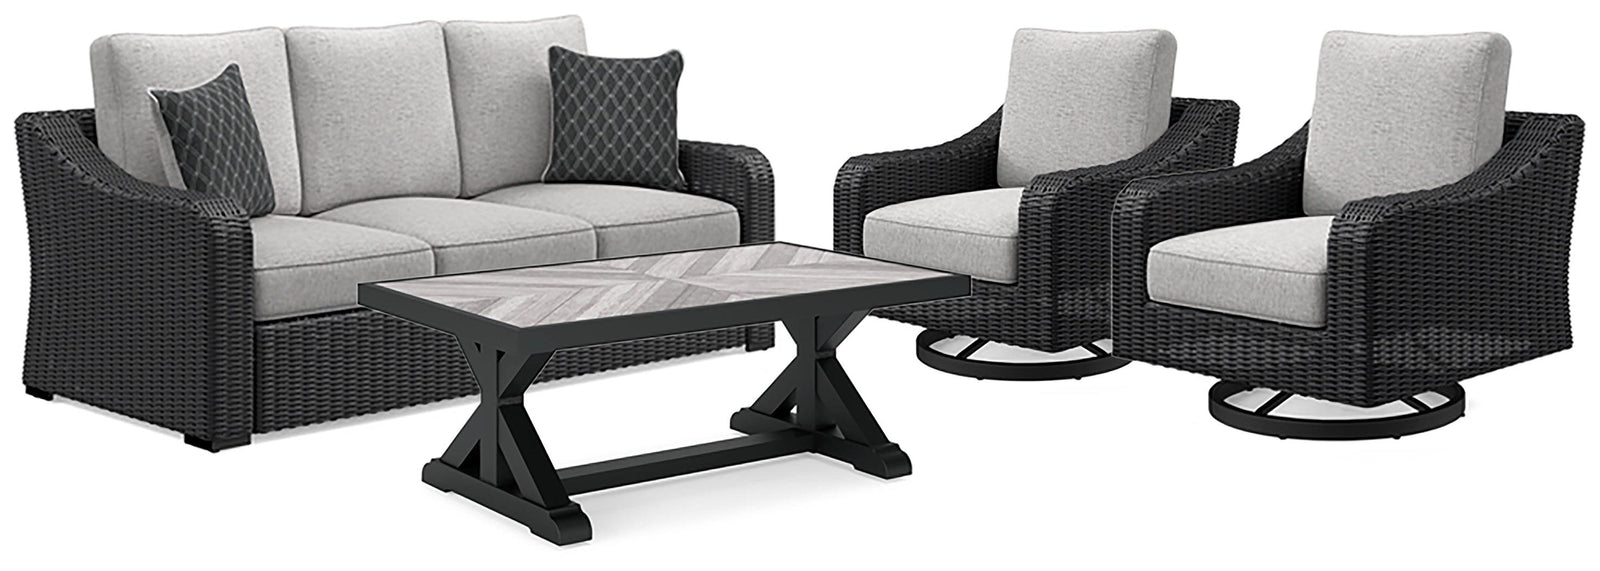 Beachcroft Black/light Gray Outdoor Sofa And 2 Chairs With Coffee Table - Ella Furniture